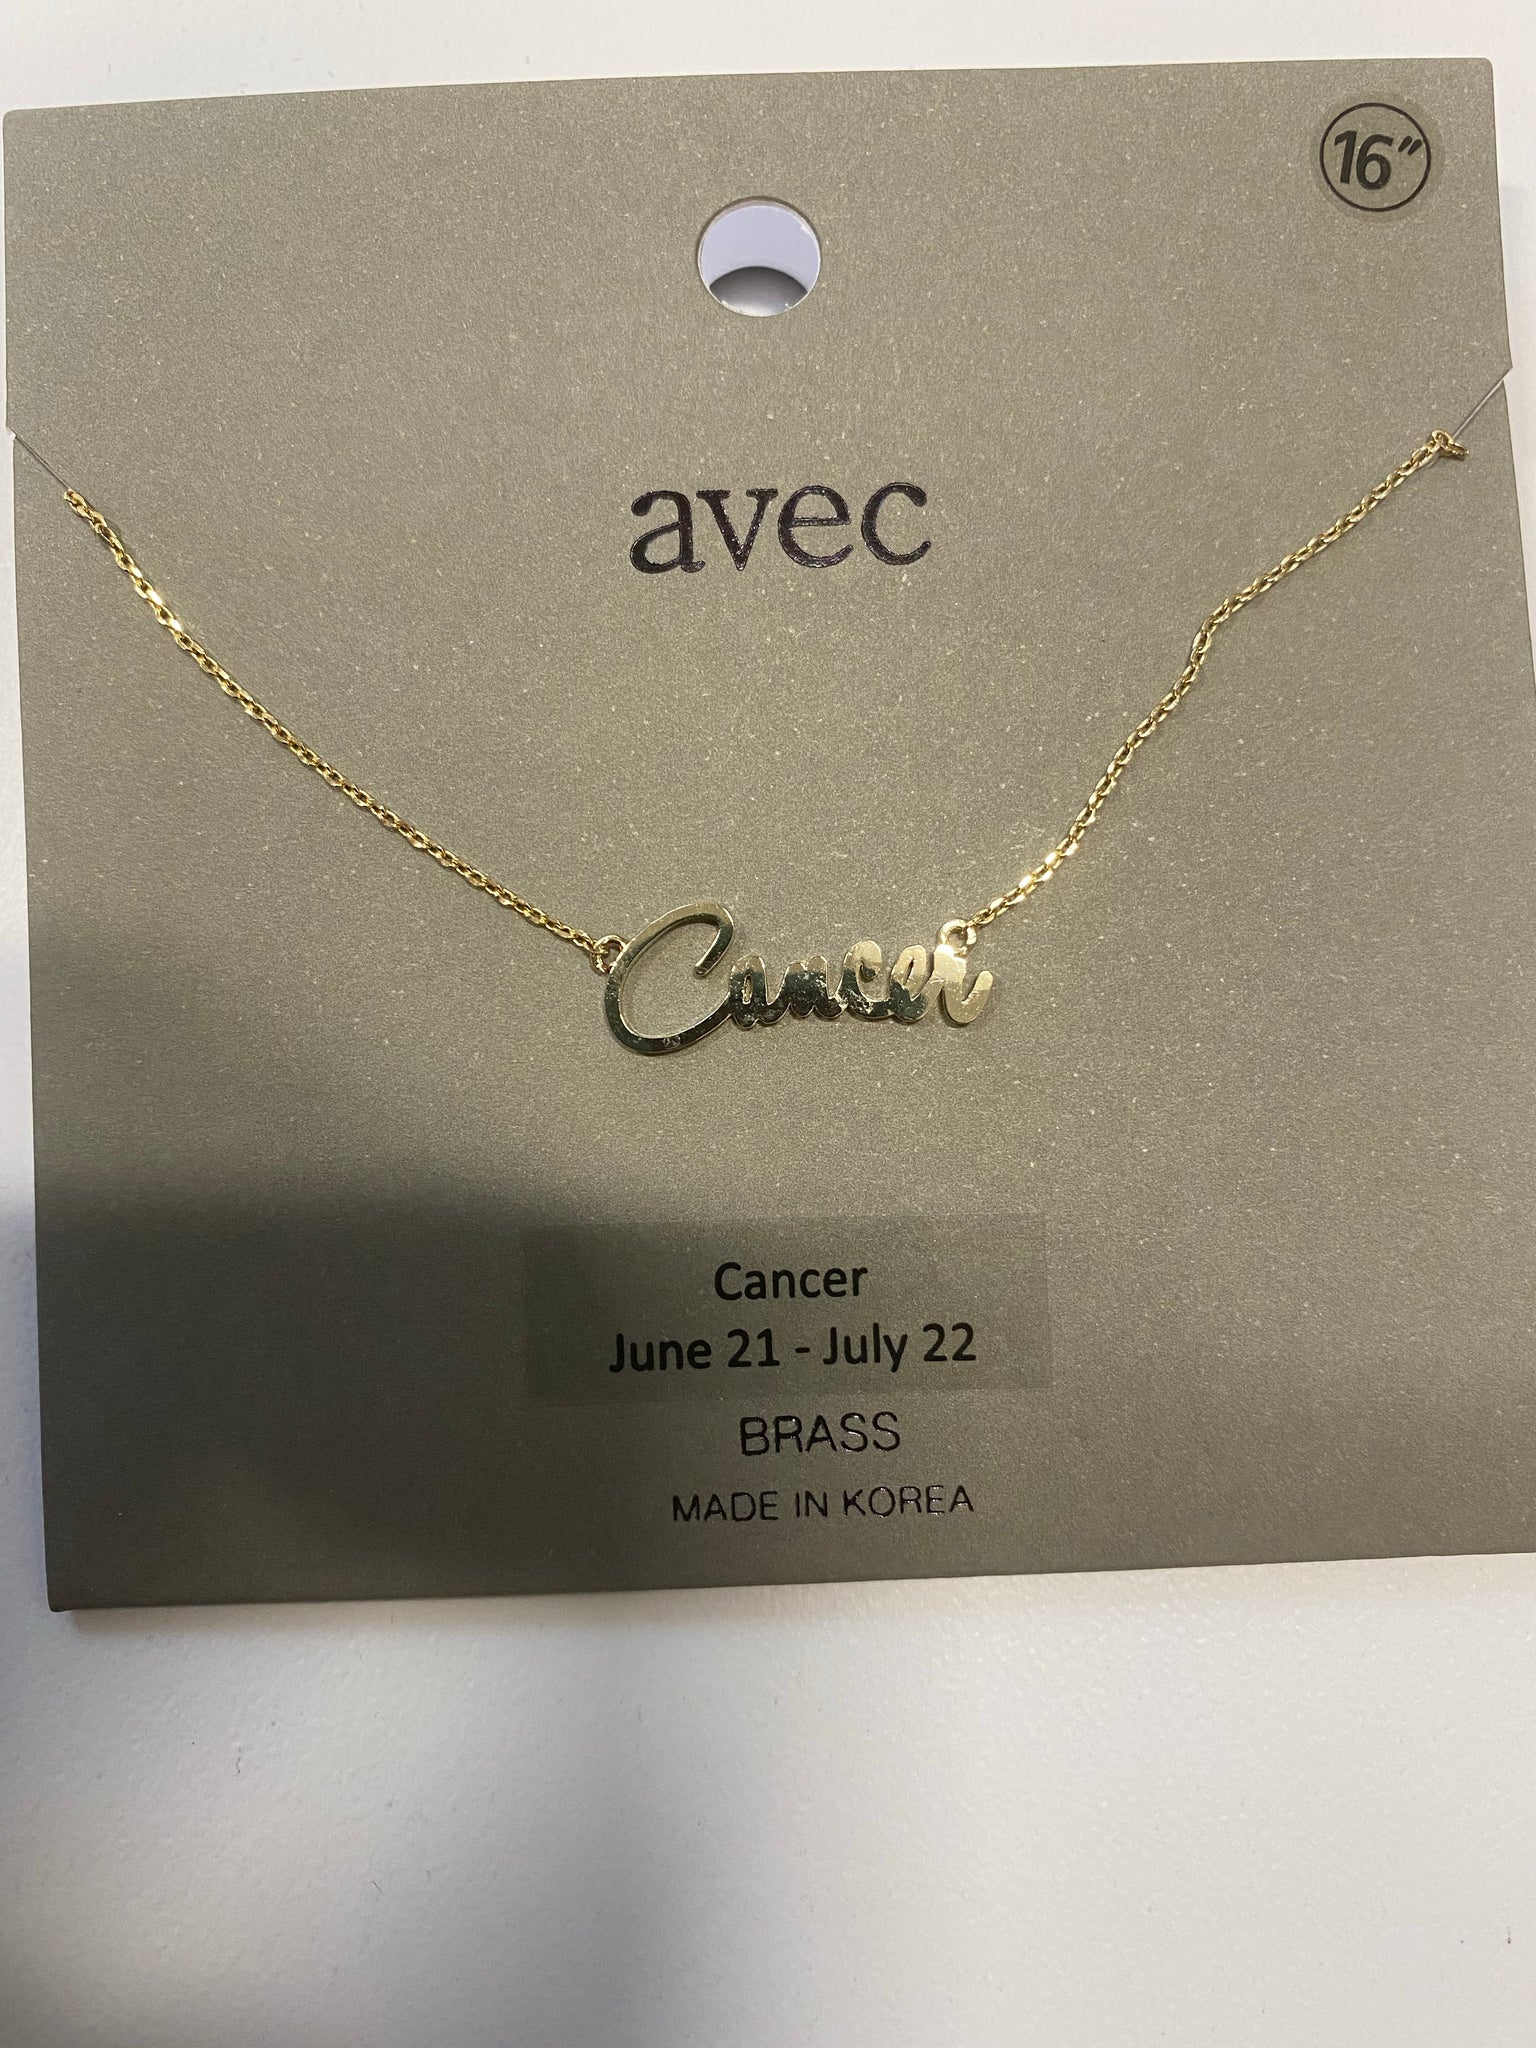 Cancer plate necklace - ggfiona